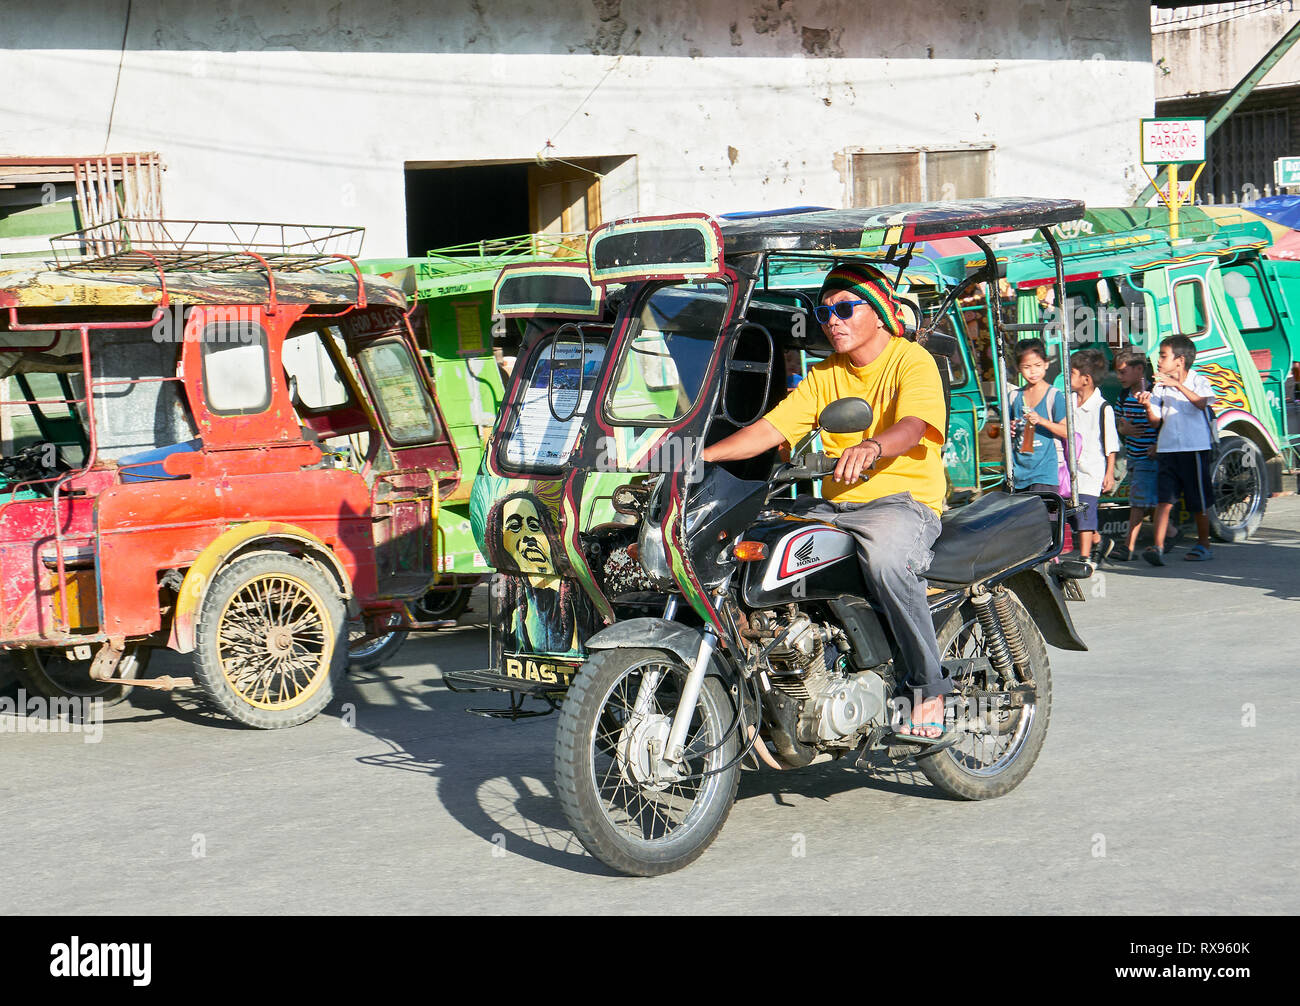 Romblon, Romblon Province, Philippines: Tricycle with Bob Marley design in the town center, parking tricycles in the background Stock Photo